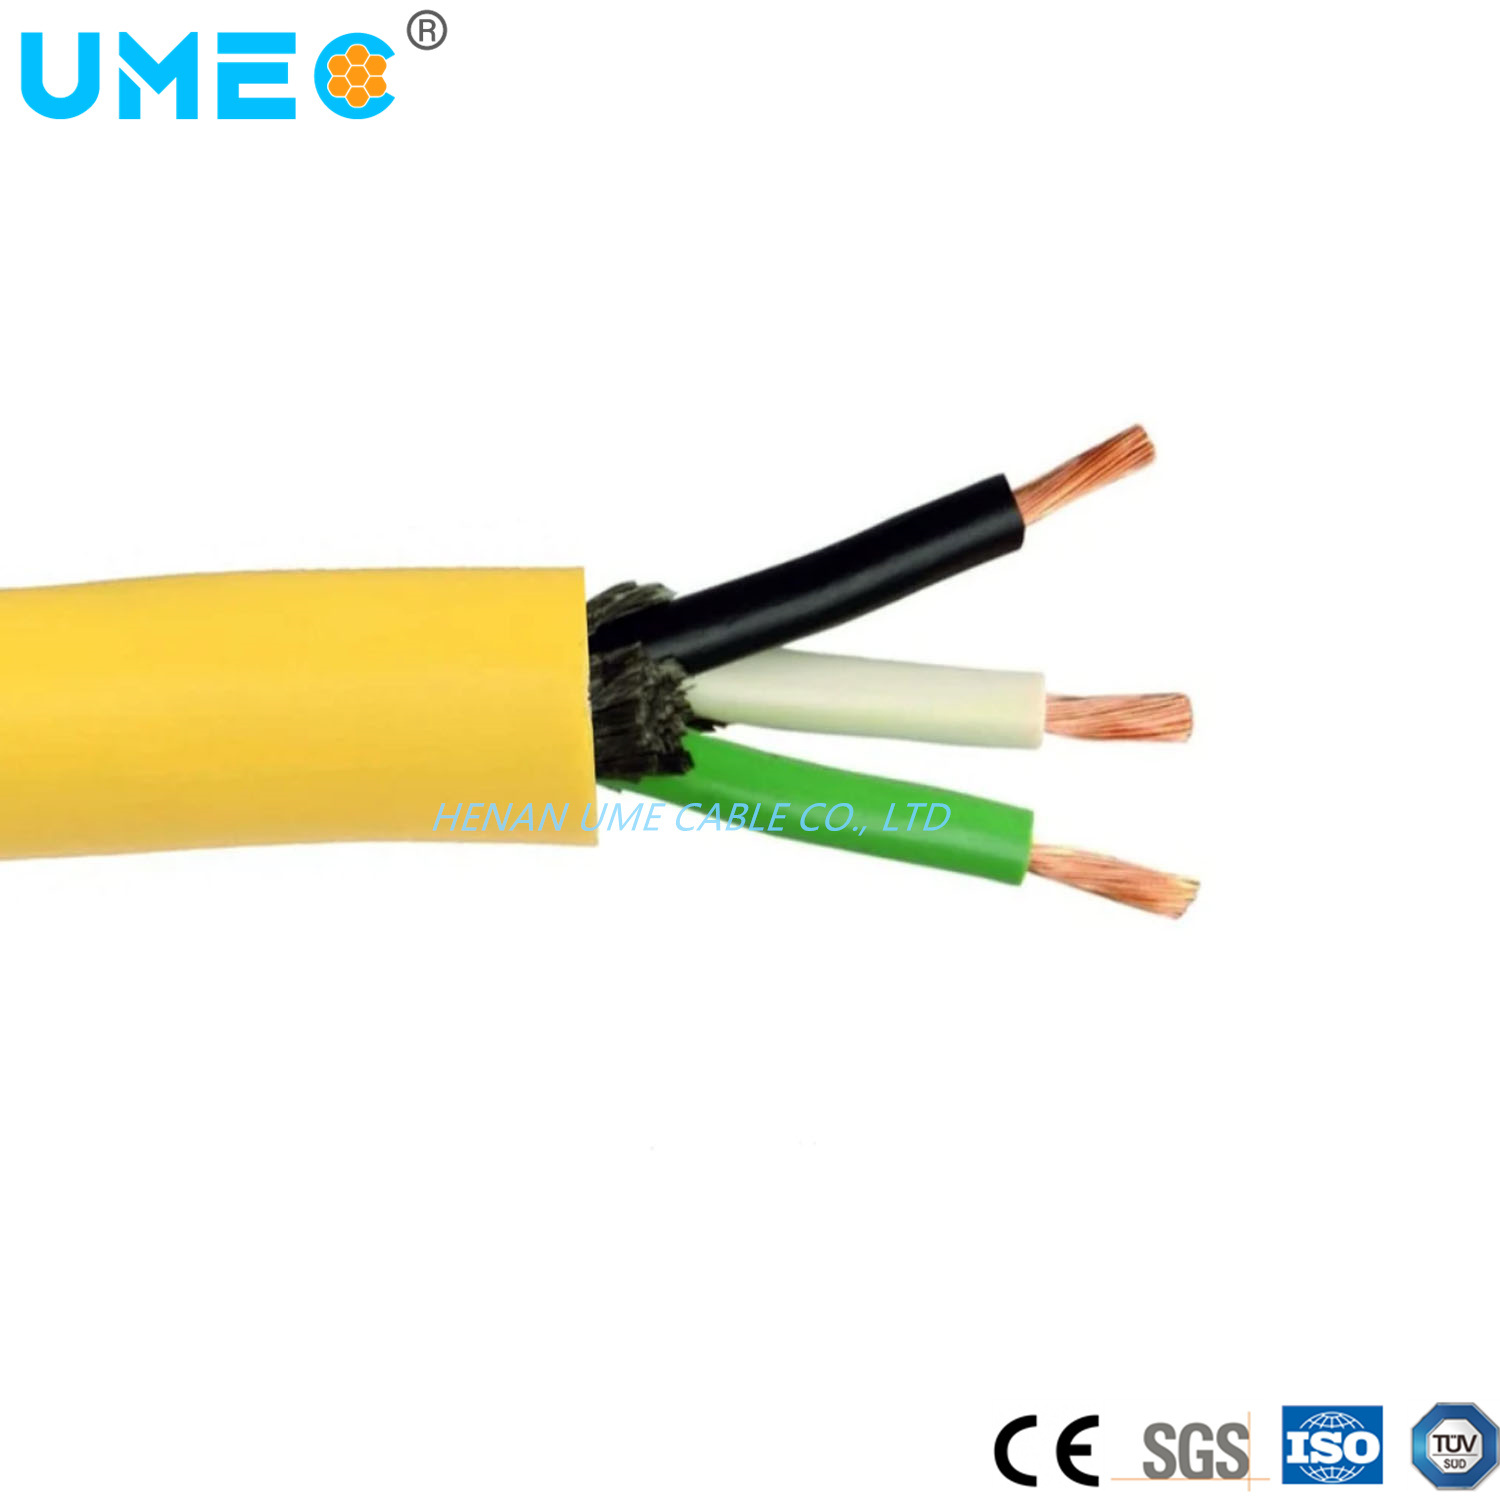 Electrical 300/500V 450/750V Rubber Cable H05rn-F H07rn-F Neroprene Epr CPE Insulated 2X1.5sqmm 3X1.5sqmm Electric Cable Wire